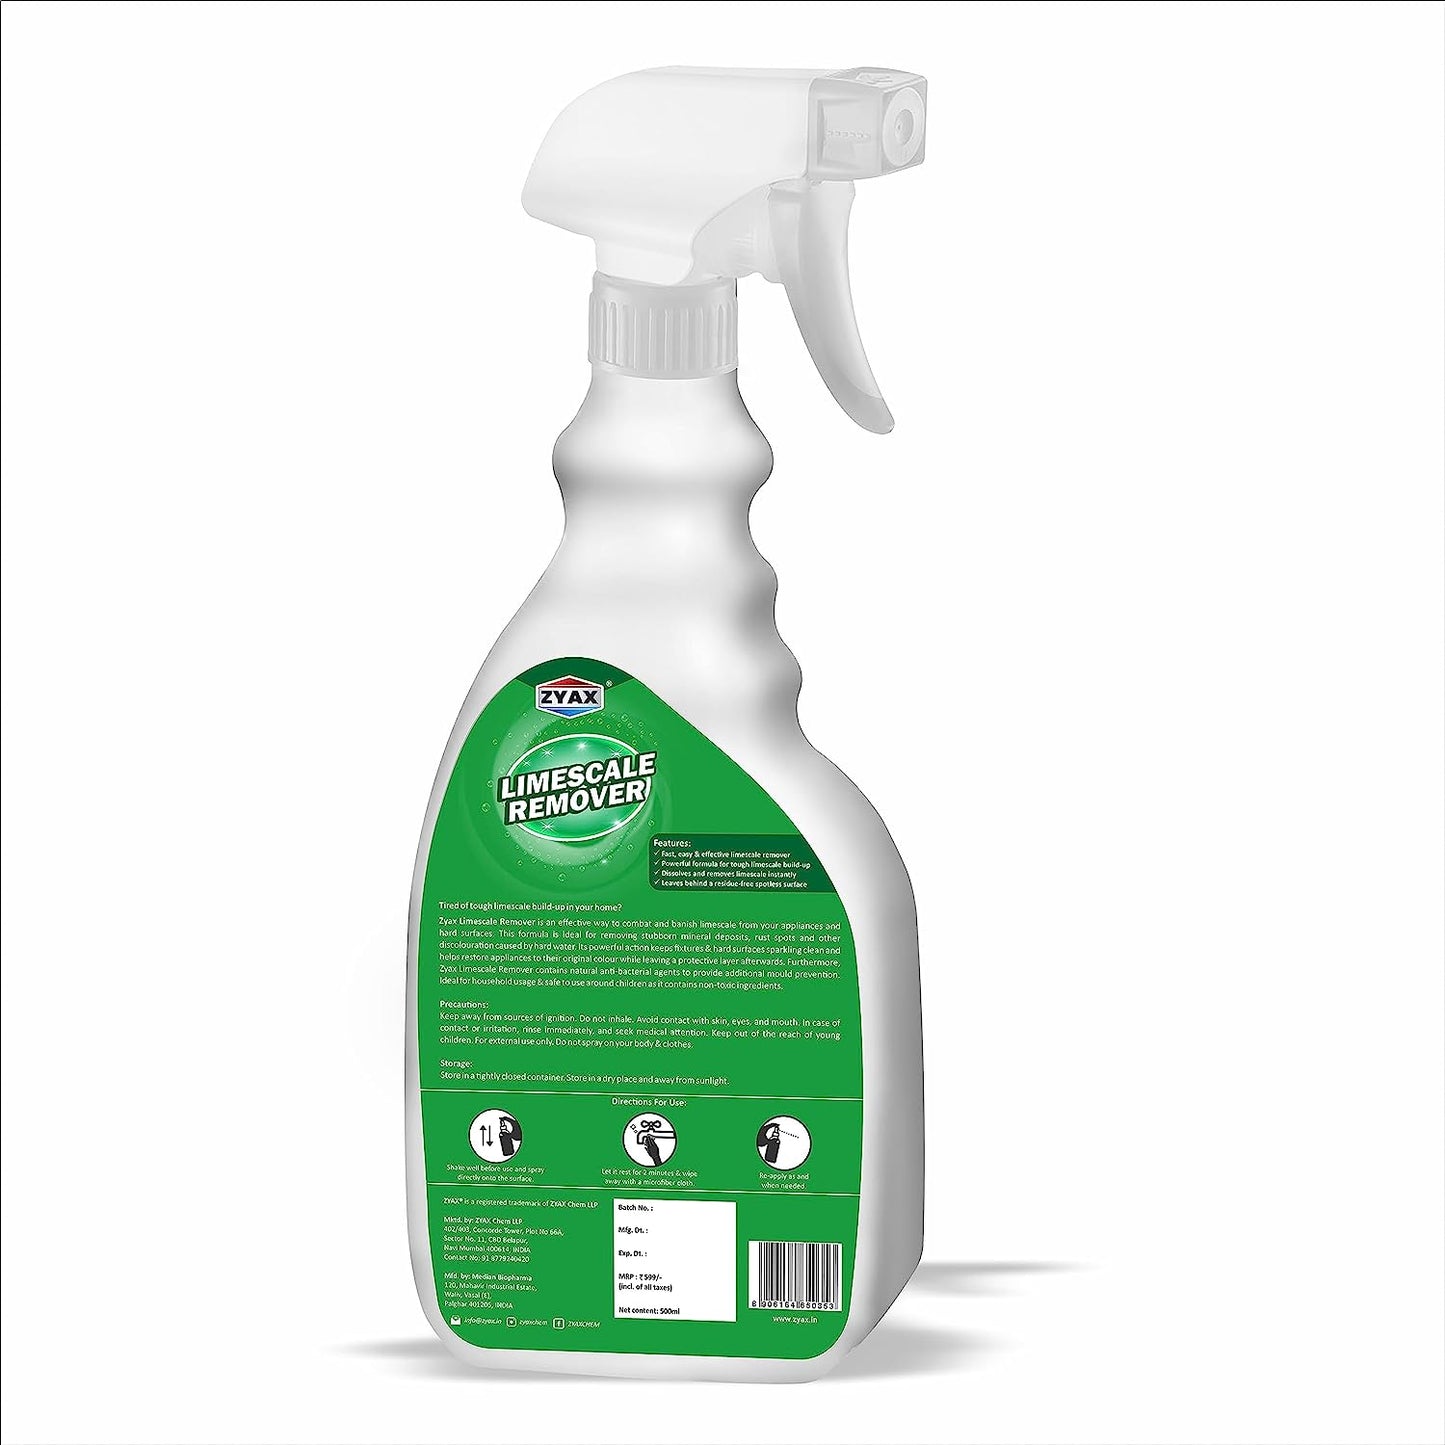 Zyax Limescale Remover - Household Stain Remover Spray - Zyax.in